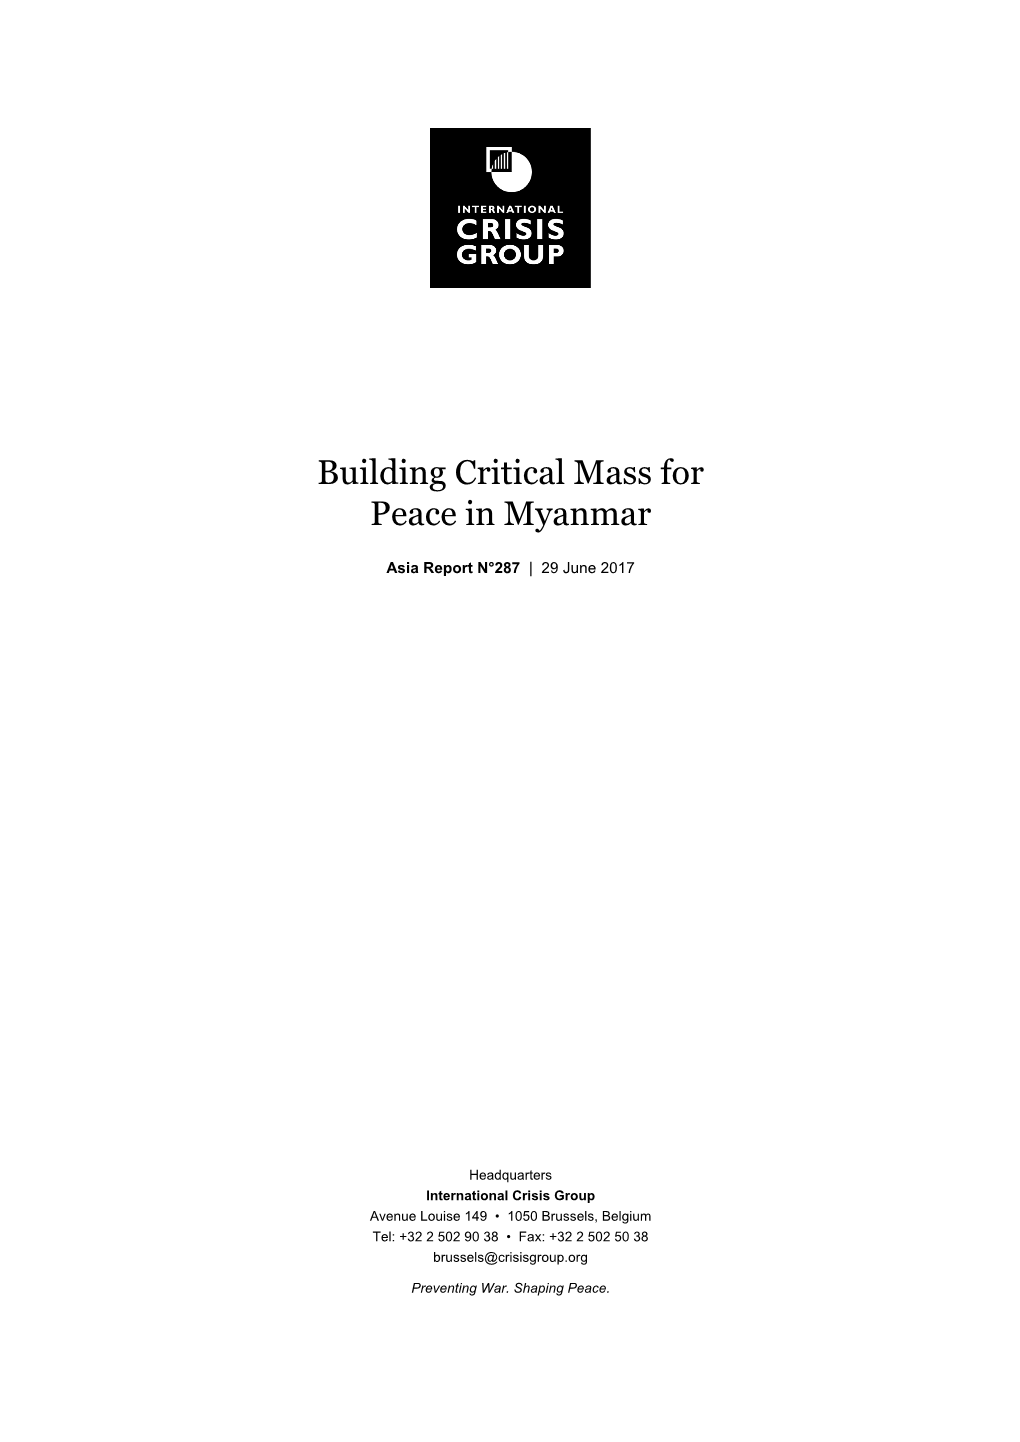 Building Critical Mass for Peace in Myanmar.Docx